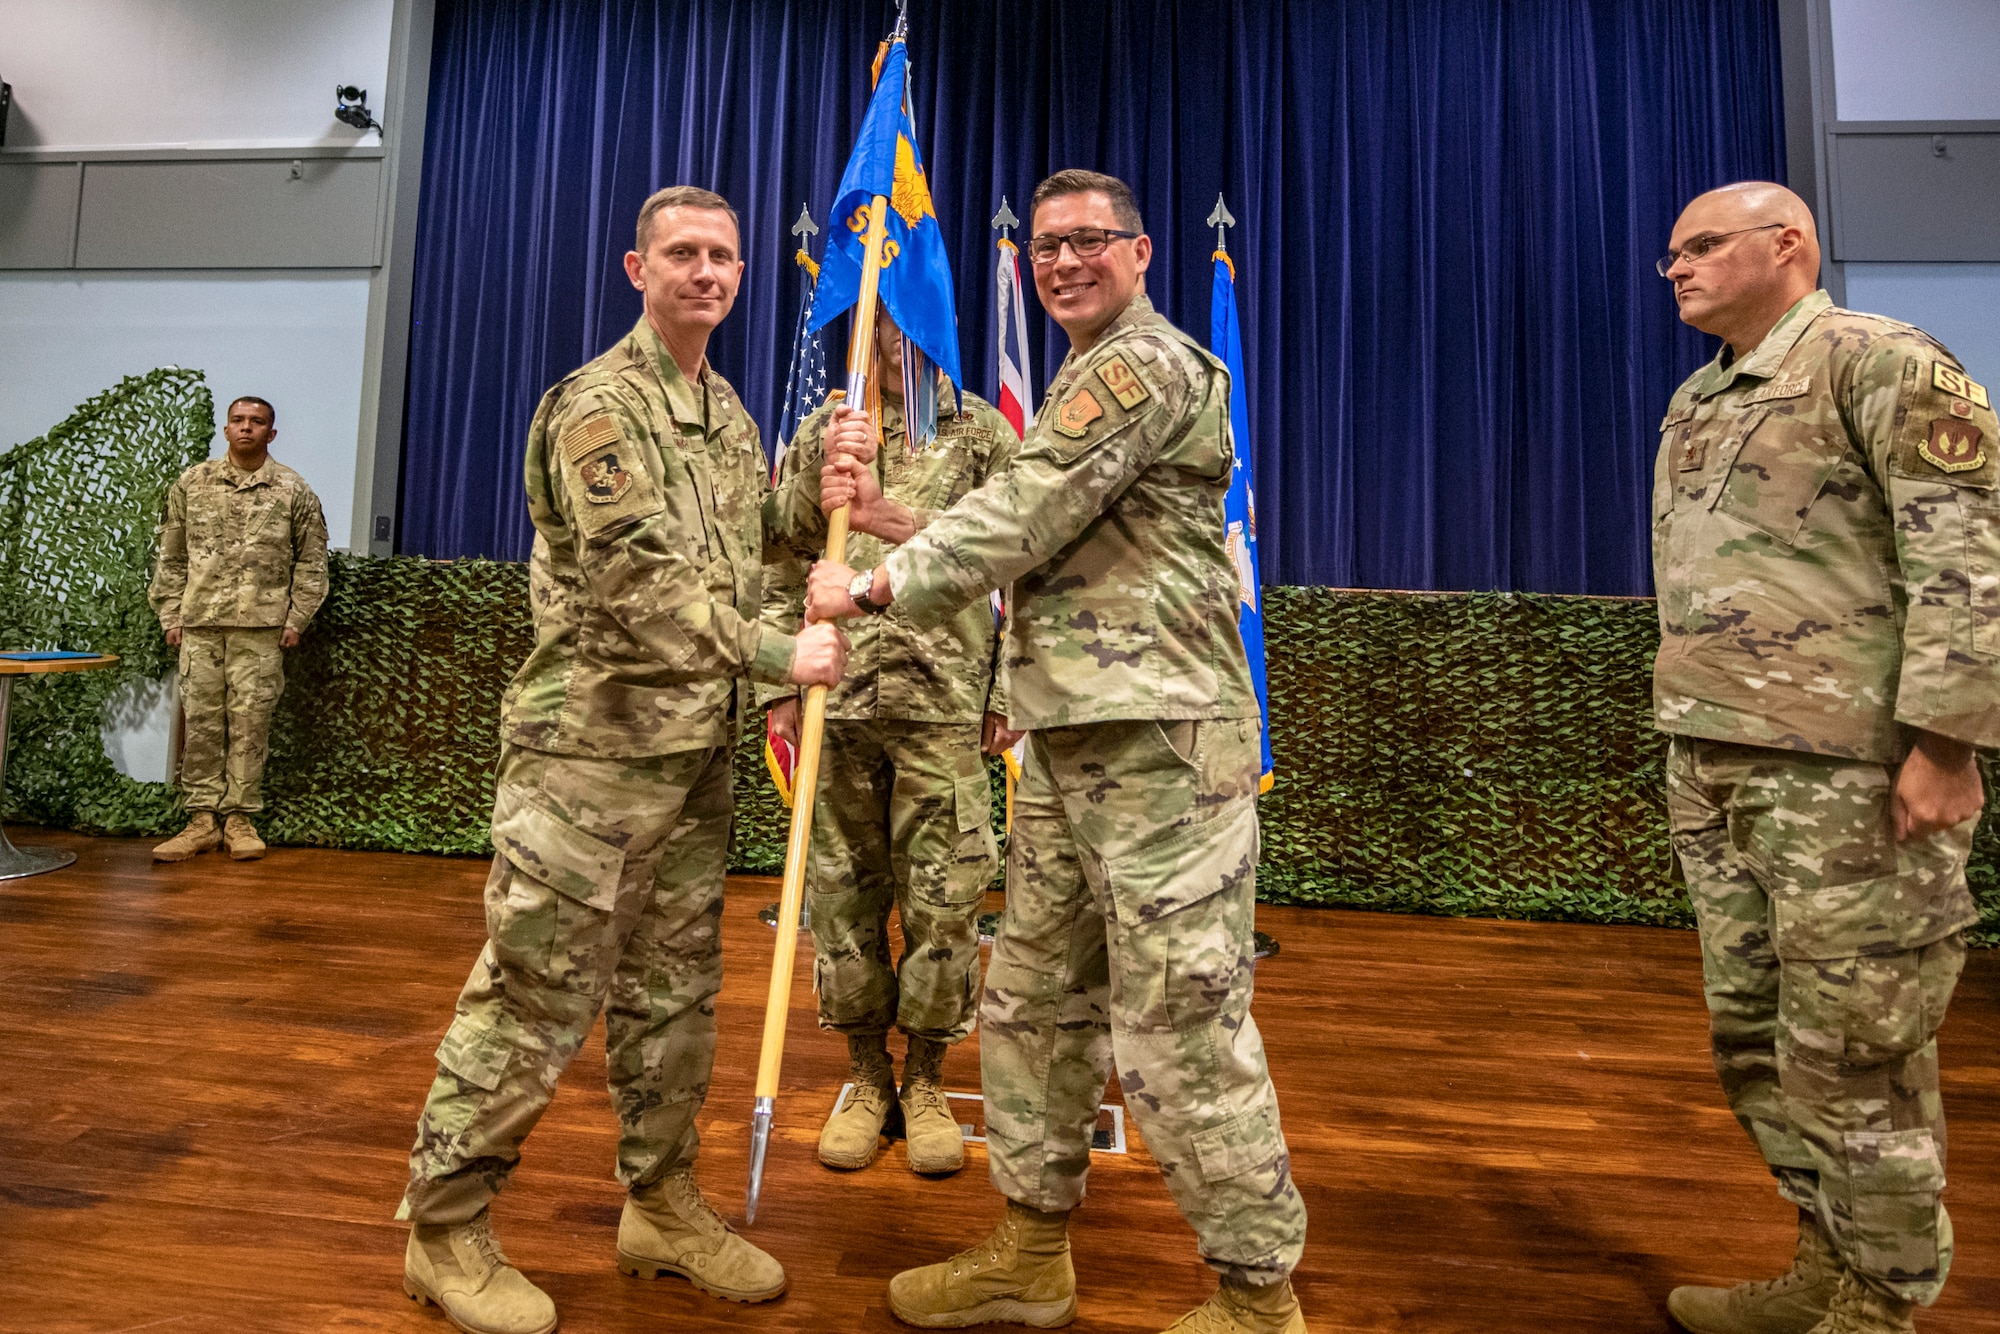 U.S. Air Force Col. Jon T. Hannah, left, 422d Air Base Group commander, receives the 422d Security Forces Squadron guidon from Maj. Thomas W. Uhl, 422d Security Forces Squadron outgoing commander, during a change of command ceremony at RAF Croughton, England, June 16, 2022. Throughout his command, Uhl led over 200 Defenders, Ministry of Defence Police and Guard along with augmentees in providing security for the U.S. Air Force’s only Bomber Forward Operation location and protection level 1 resources within the United Kingdom. (U.S. Air Force photo by Staff Sgt. Eugene Oliver)